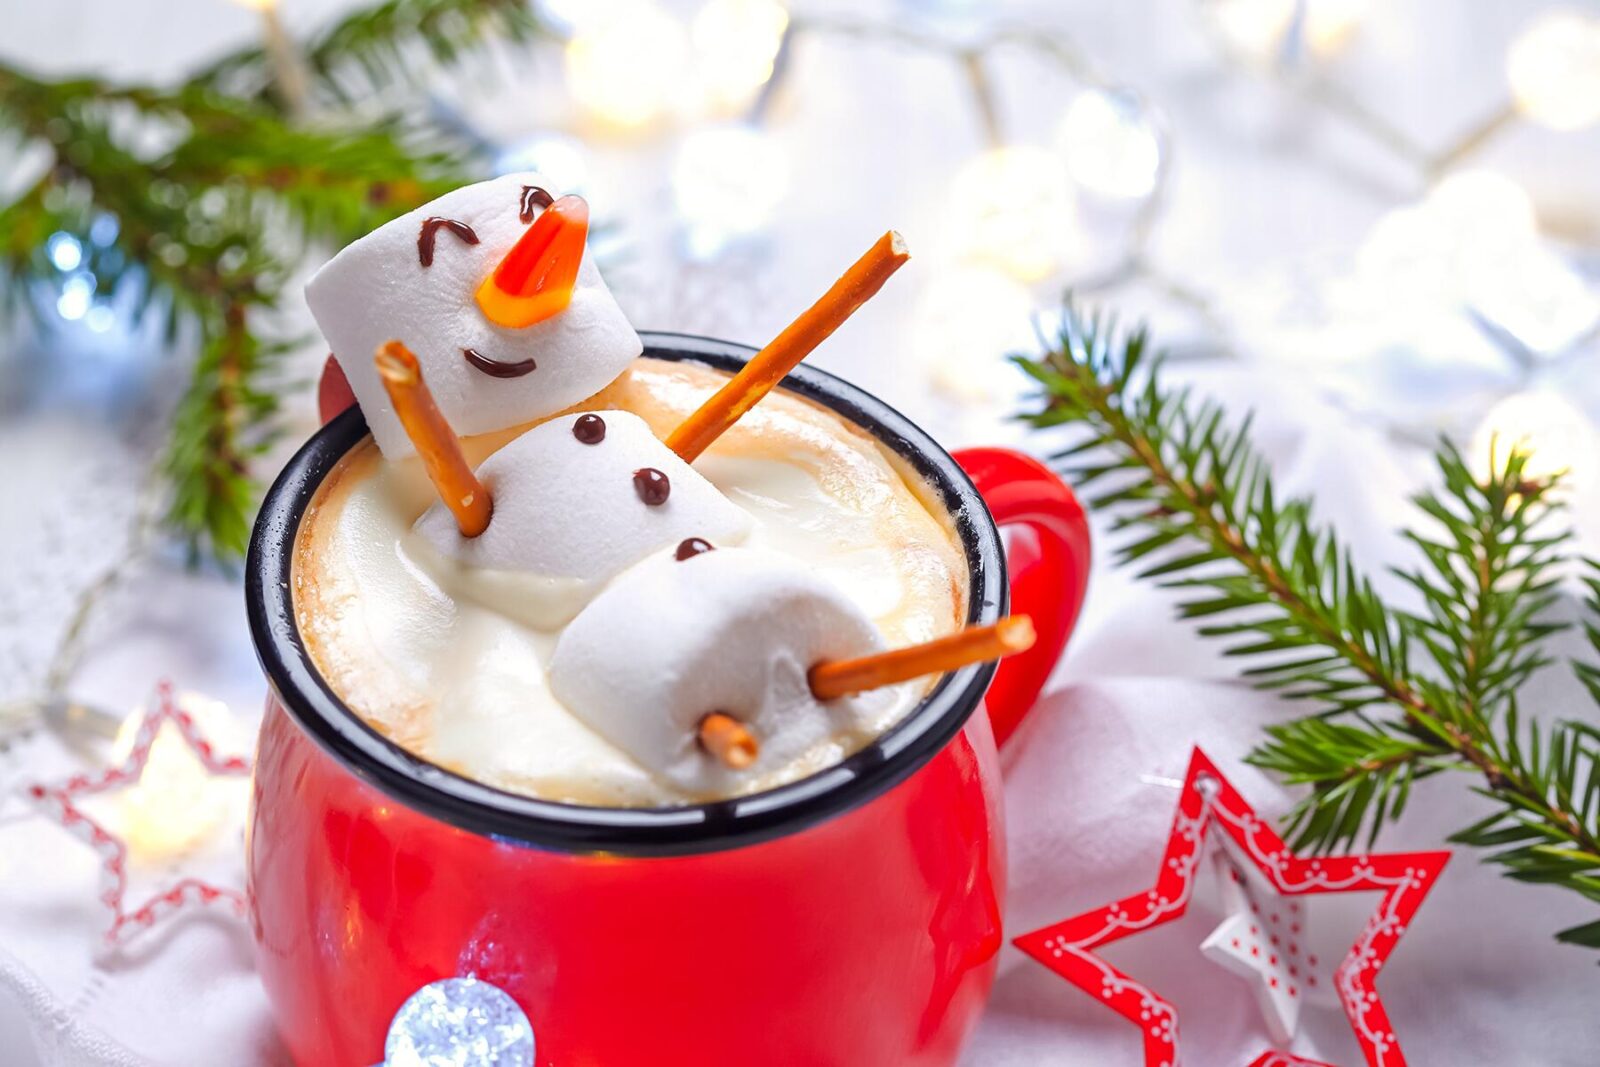 Snowman winter holiday drink